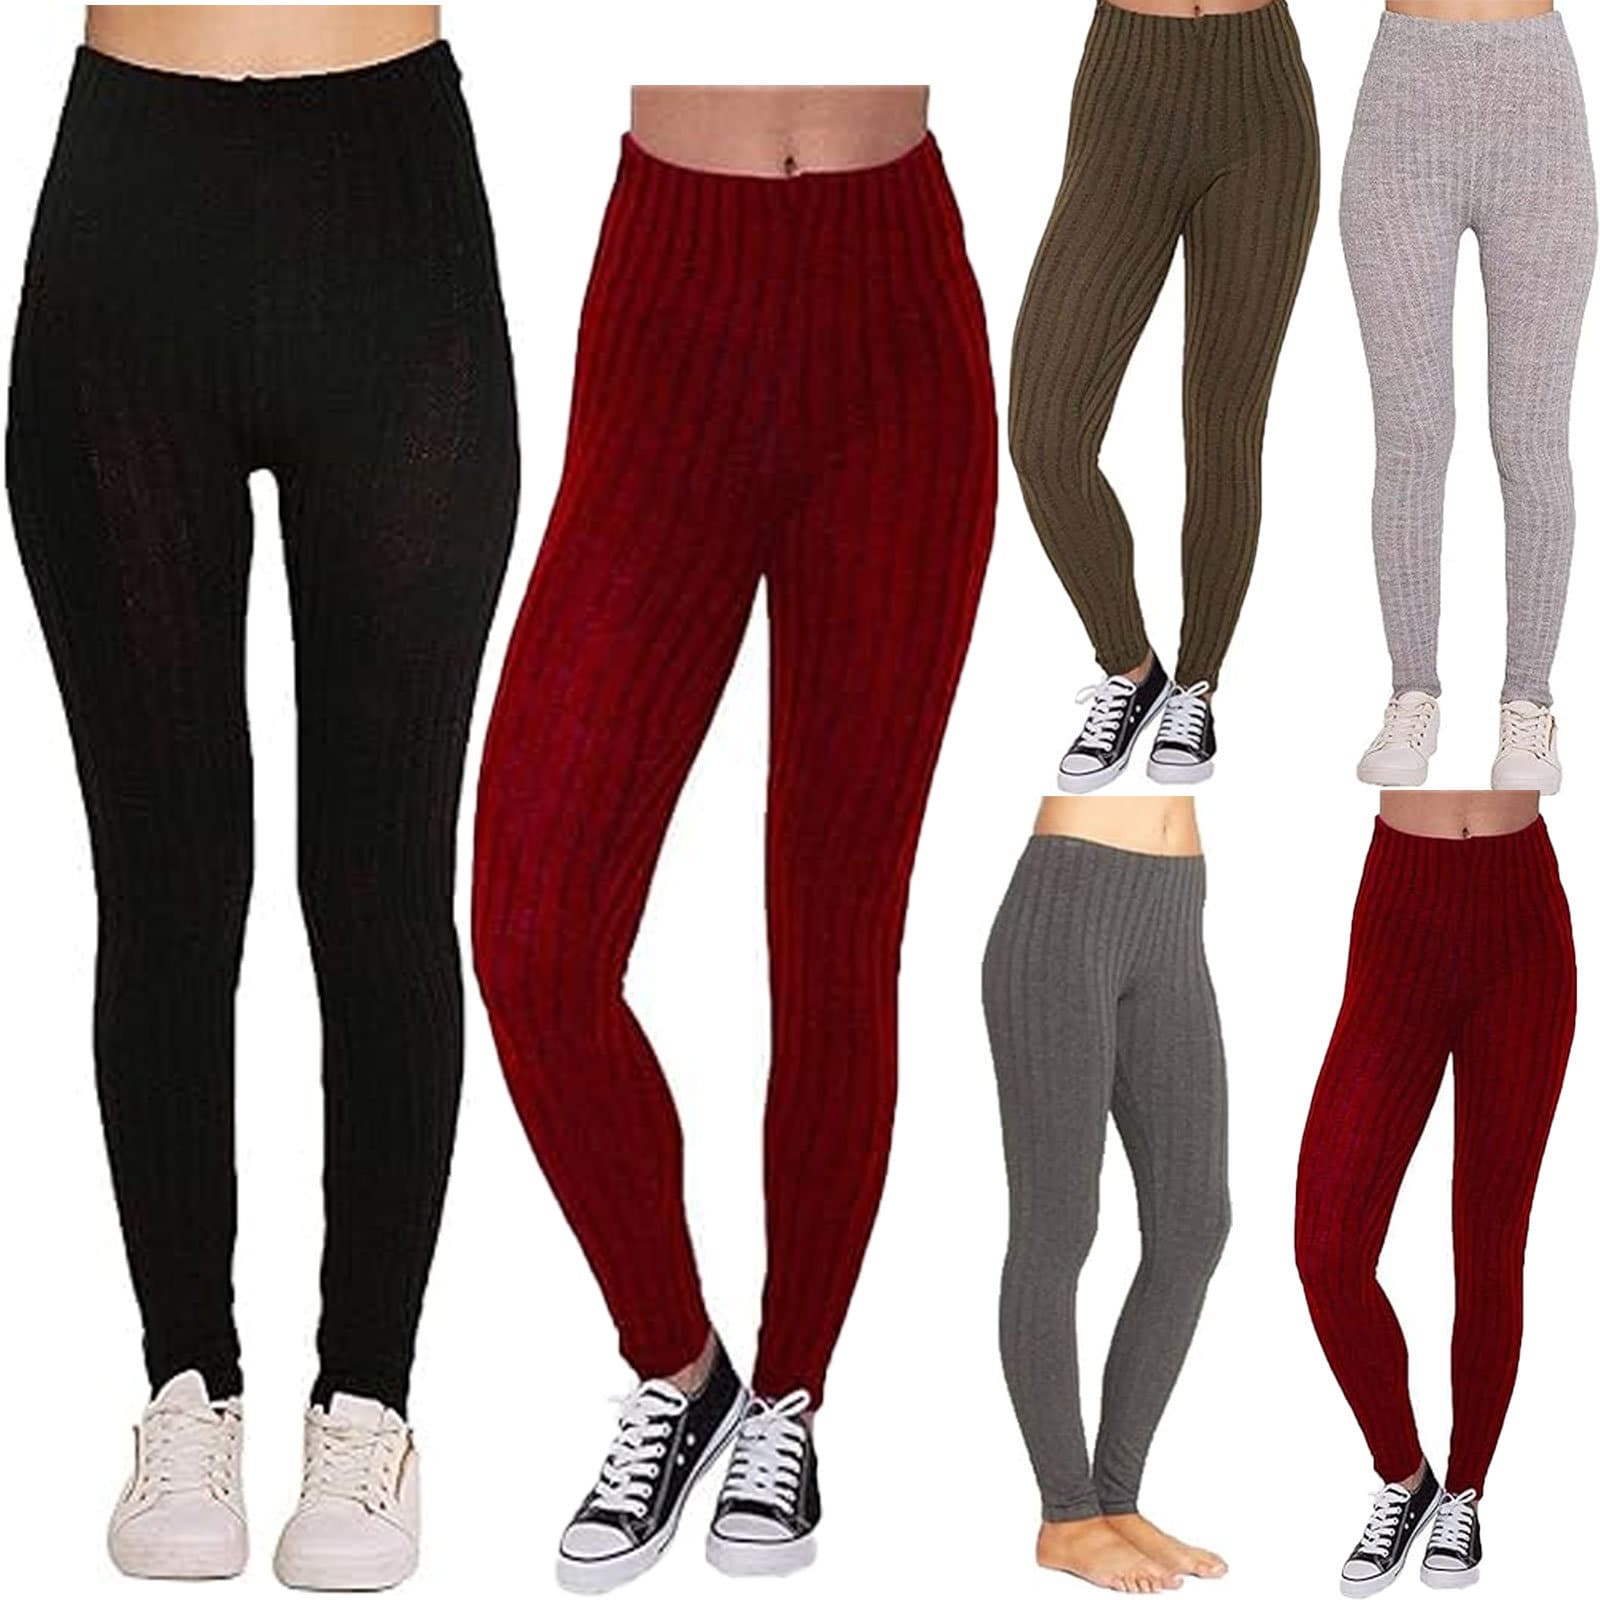 Fleece Lined Leggings Solid, High Waist, Warm Thick Leggings Fits